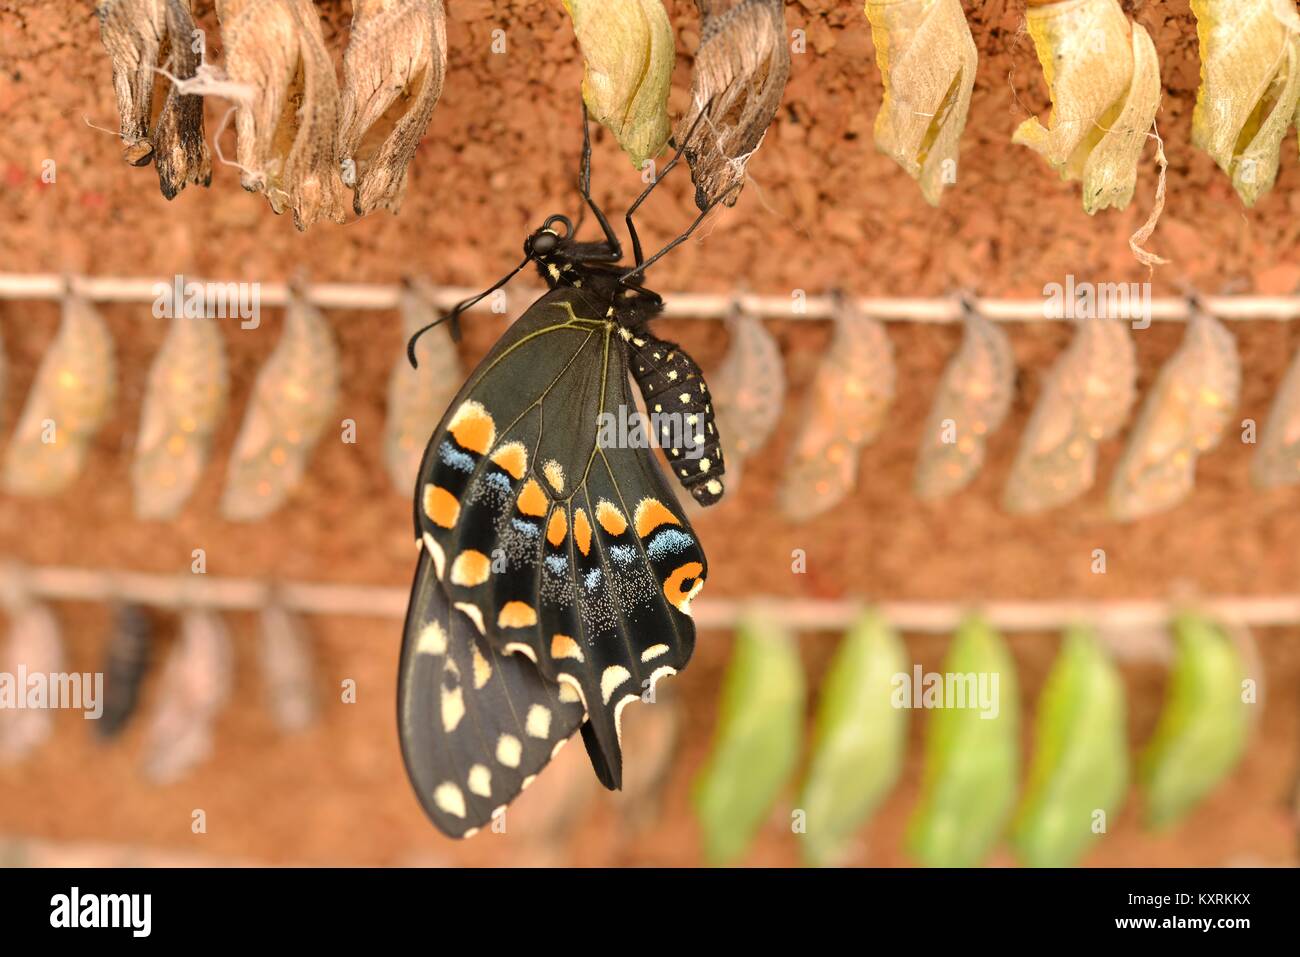 New Born Butterfly - A beautiful newborn Black Swallowtail Butterfly just emerges out its chrysalis-pupa - a new butterfly is born. Stock Photo